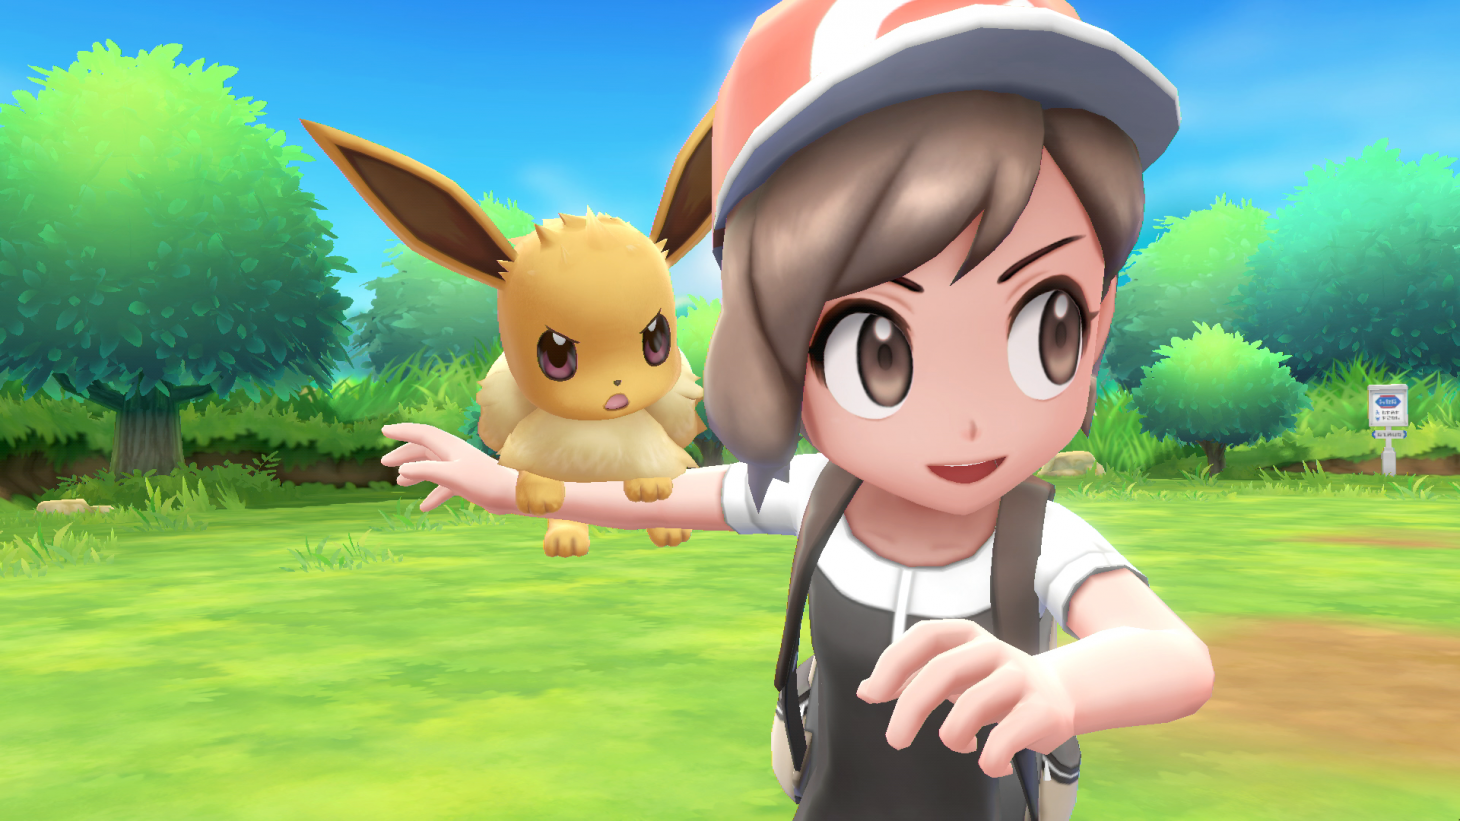 Update] The Pokémon Company Clarifies Let's Go Games' Online Functionality  - Game Informer